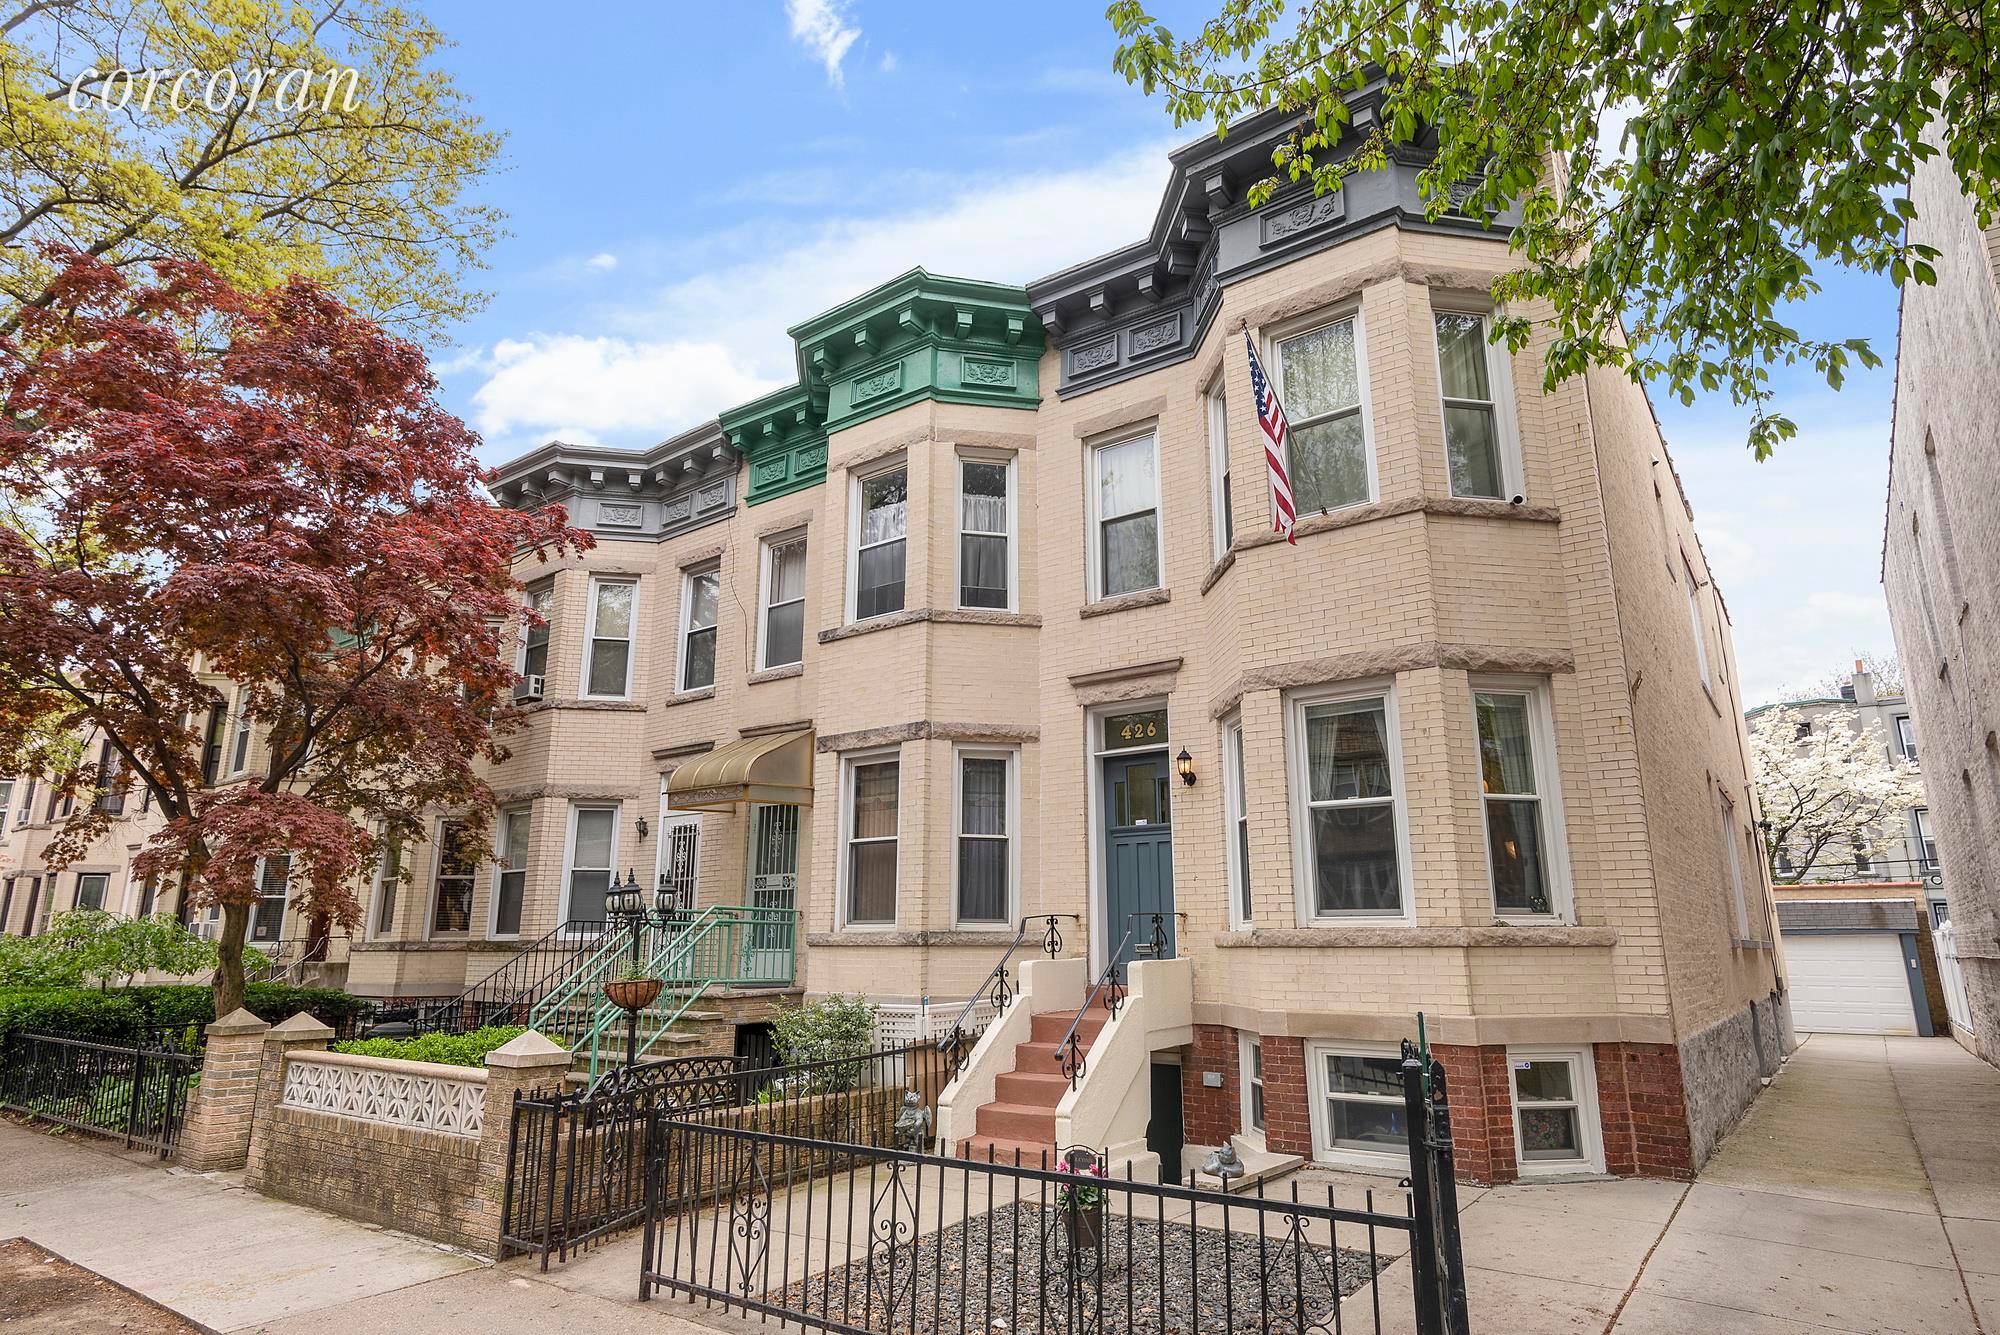 Perfectly located and rarely available renovated semi attached Bay Ridge barrel front townhouse with three exposures, a private driveway, a two car garage and driveway that can accommodate 2 additional ...